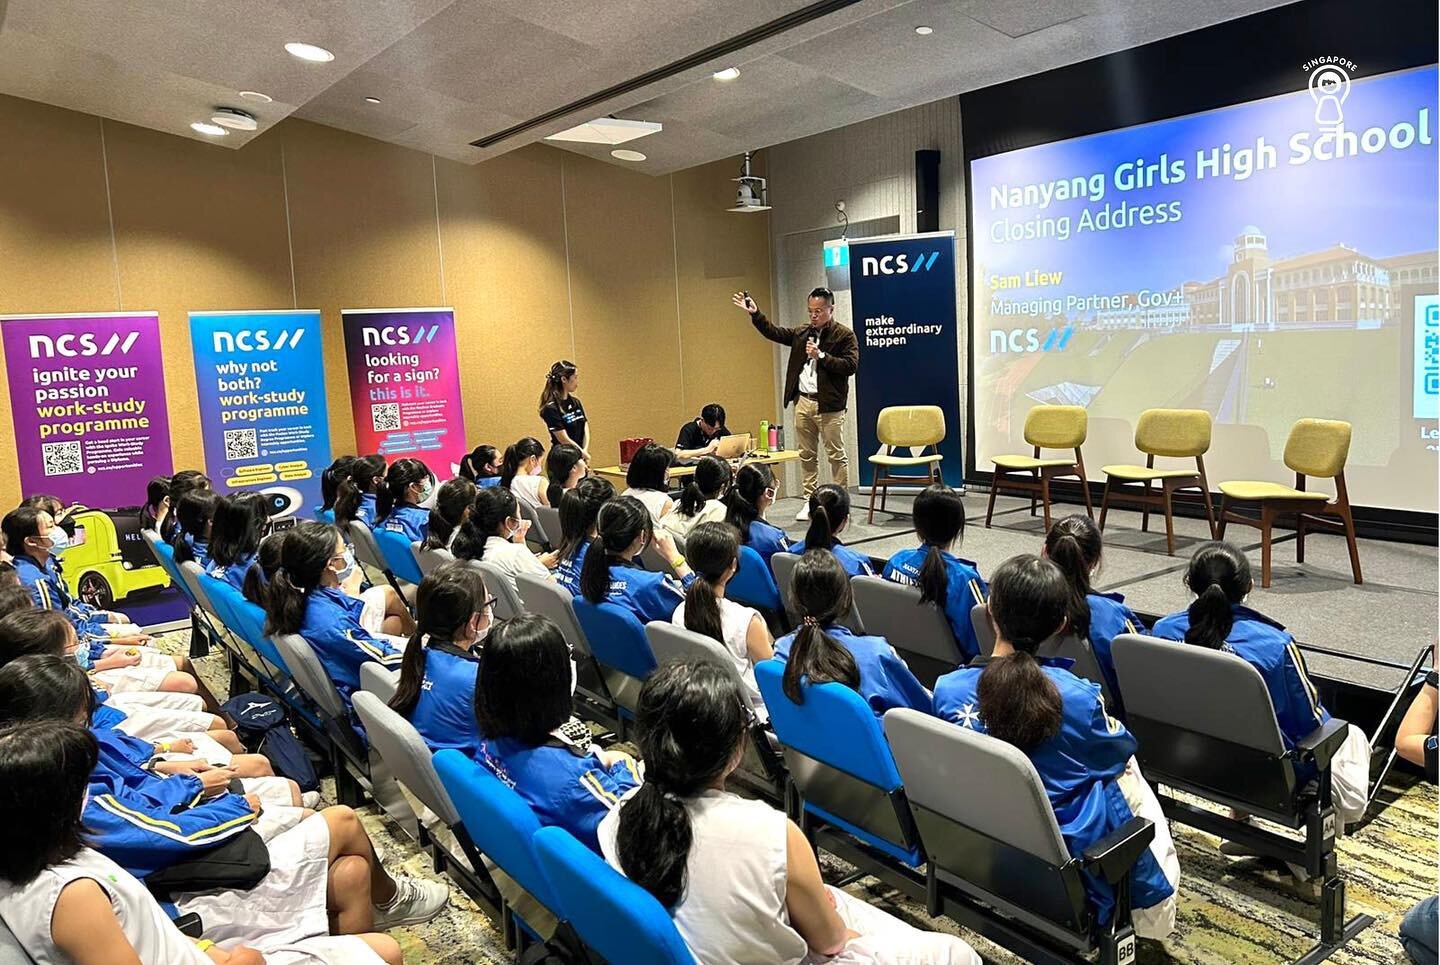 What an amazing day learning and getting introduced to a new world of possibilities in STEM, Construction, Reinsurance, and Intellectual Property - all thanks to our partners NCS Group, Leighton Asia, SCOR, and World Intellectual Property Organizatio